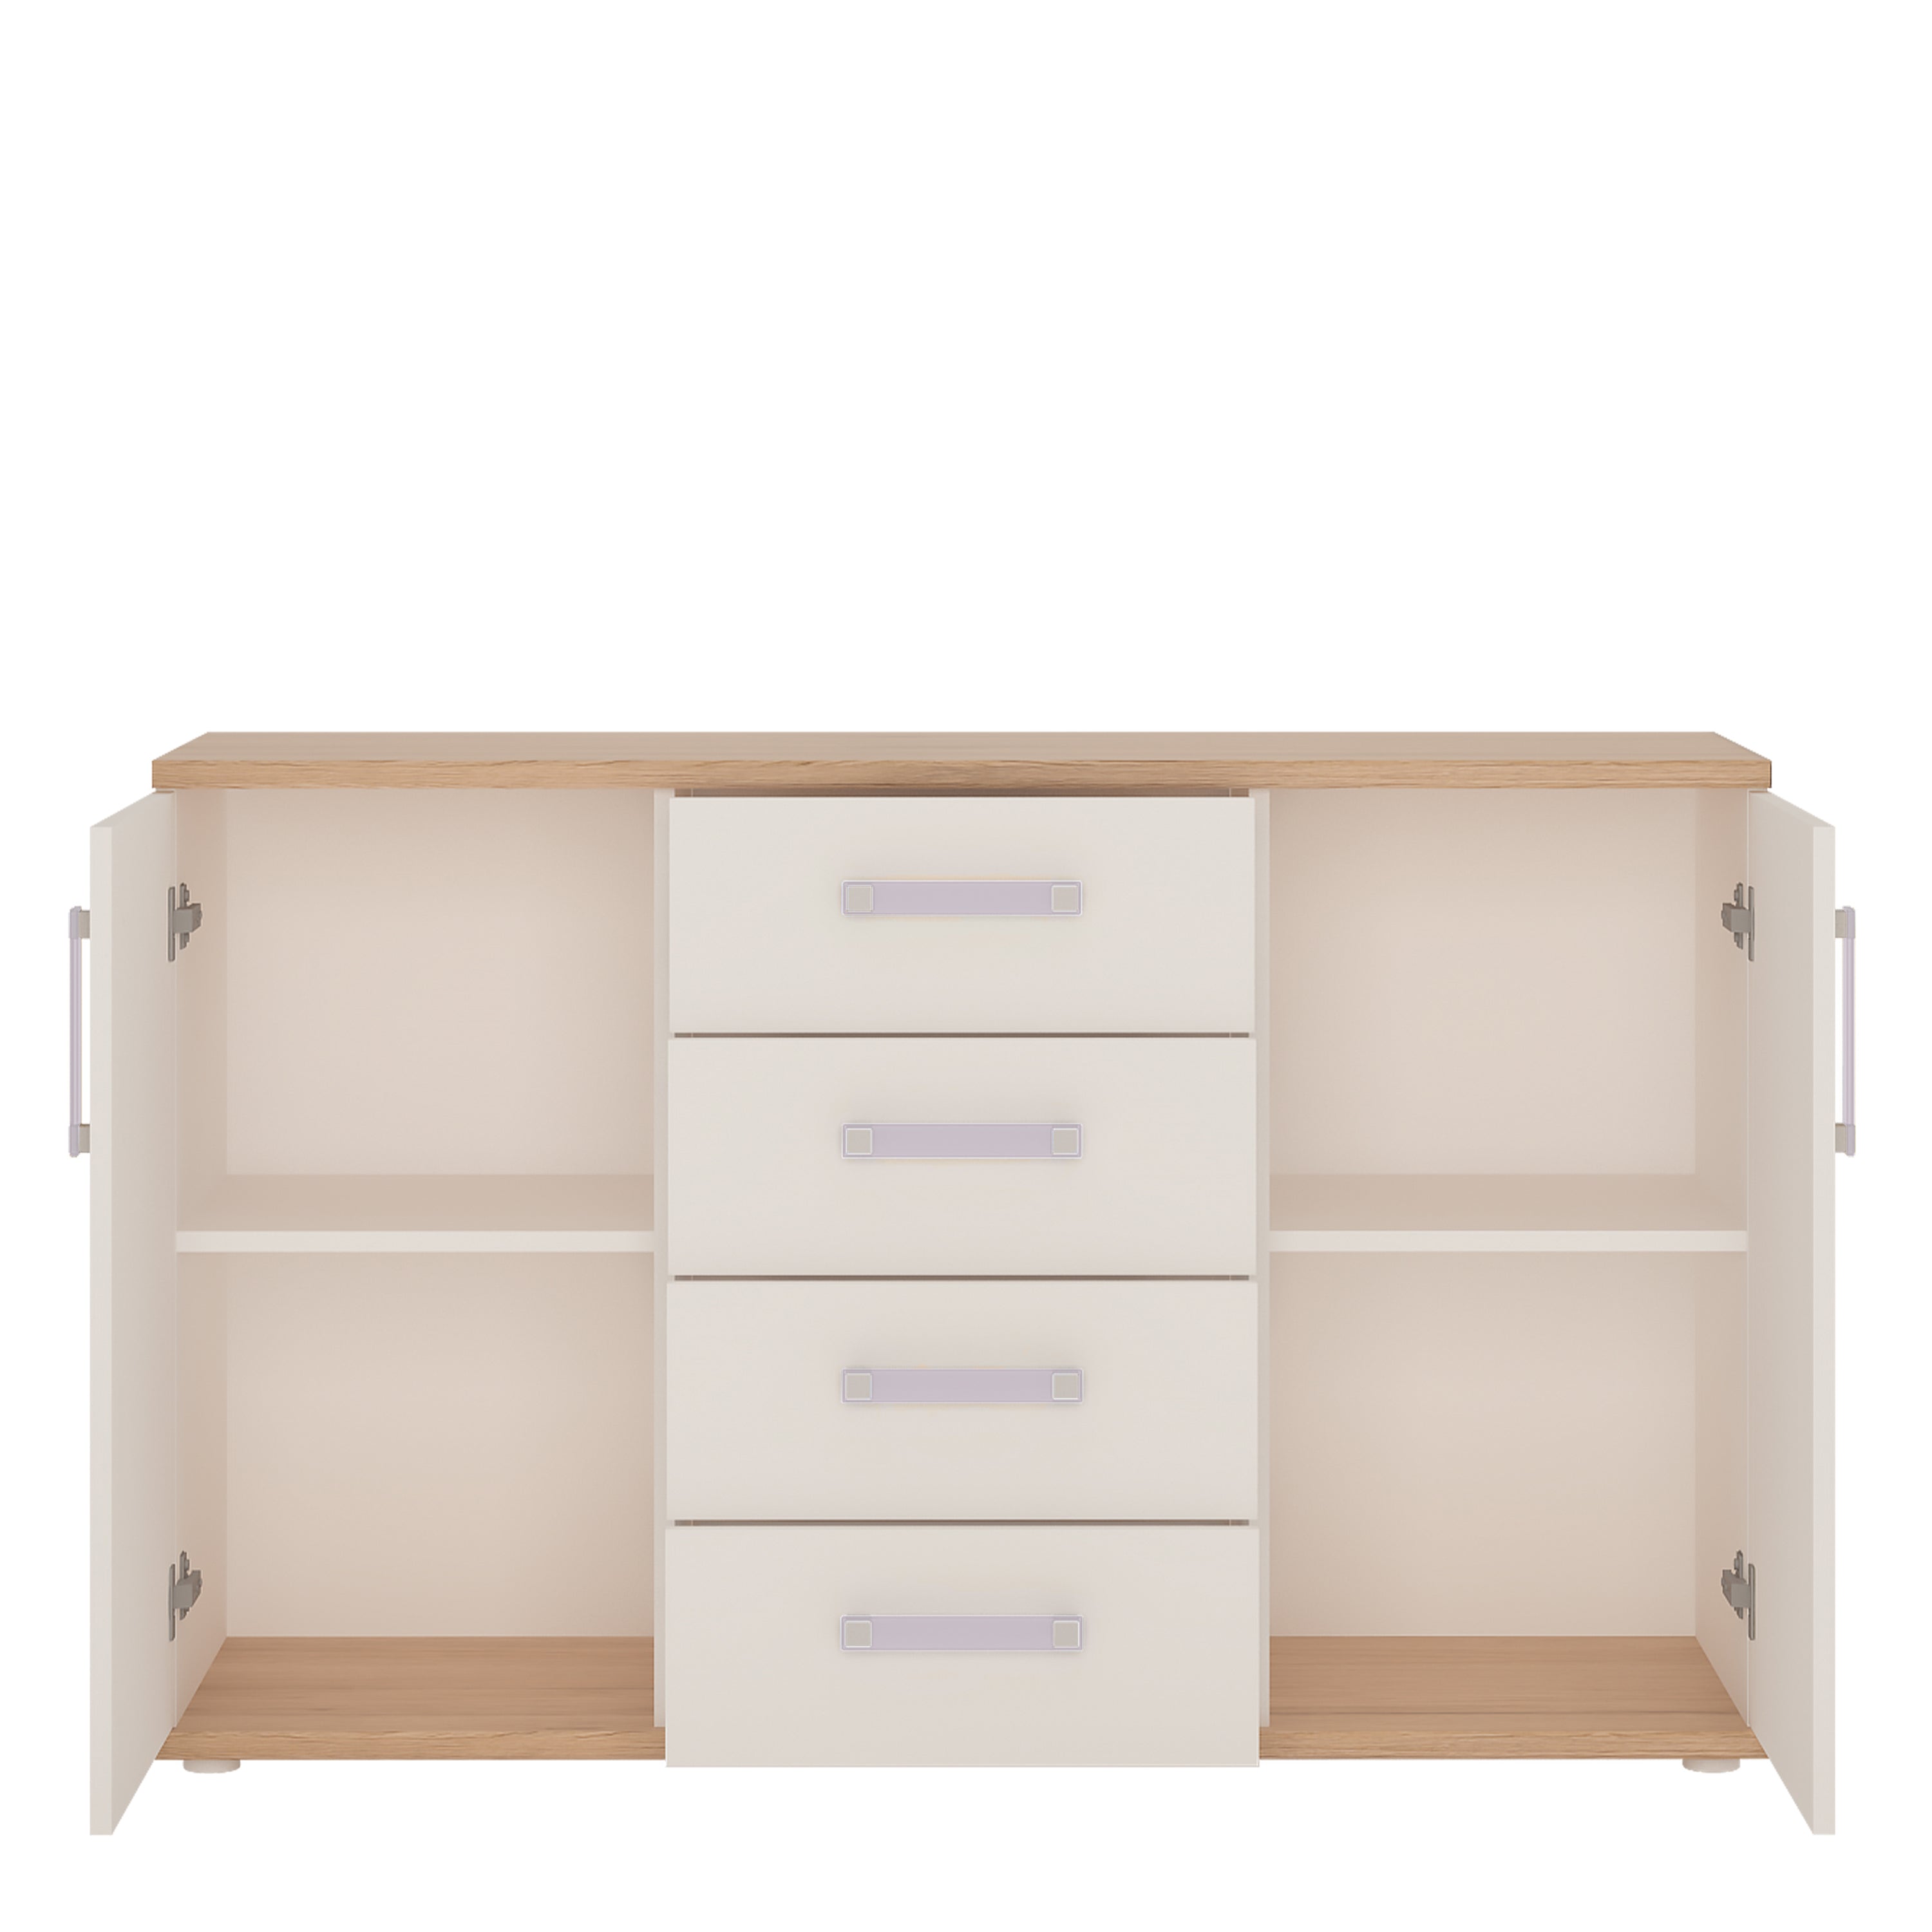 4Kids 2 Door 4 Drawer Sideboard in Light Oak and white High Gloss (lilac handles)